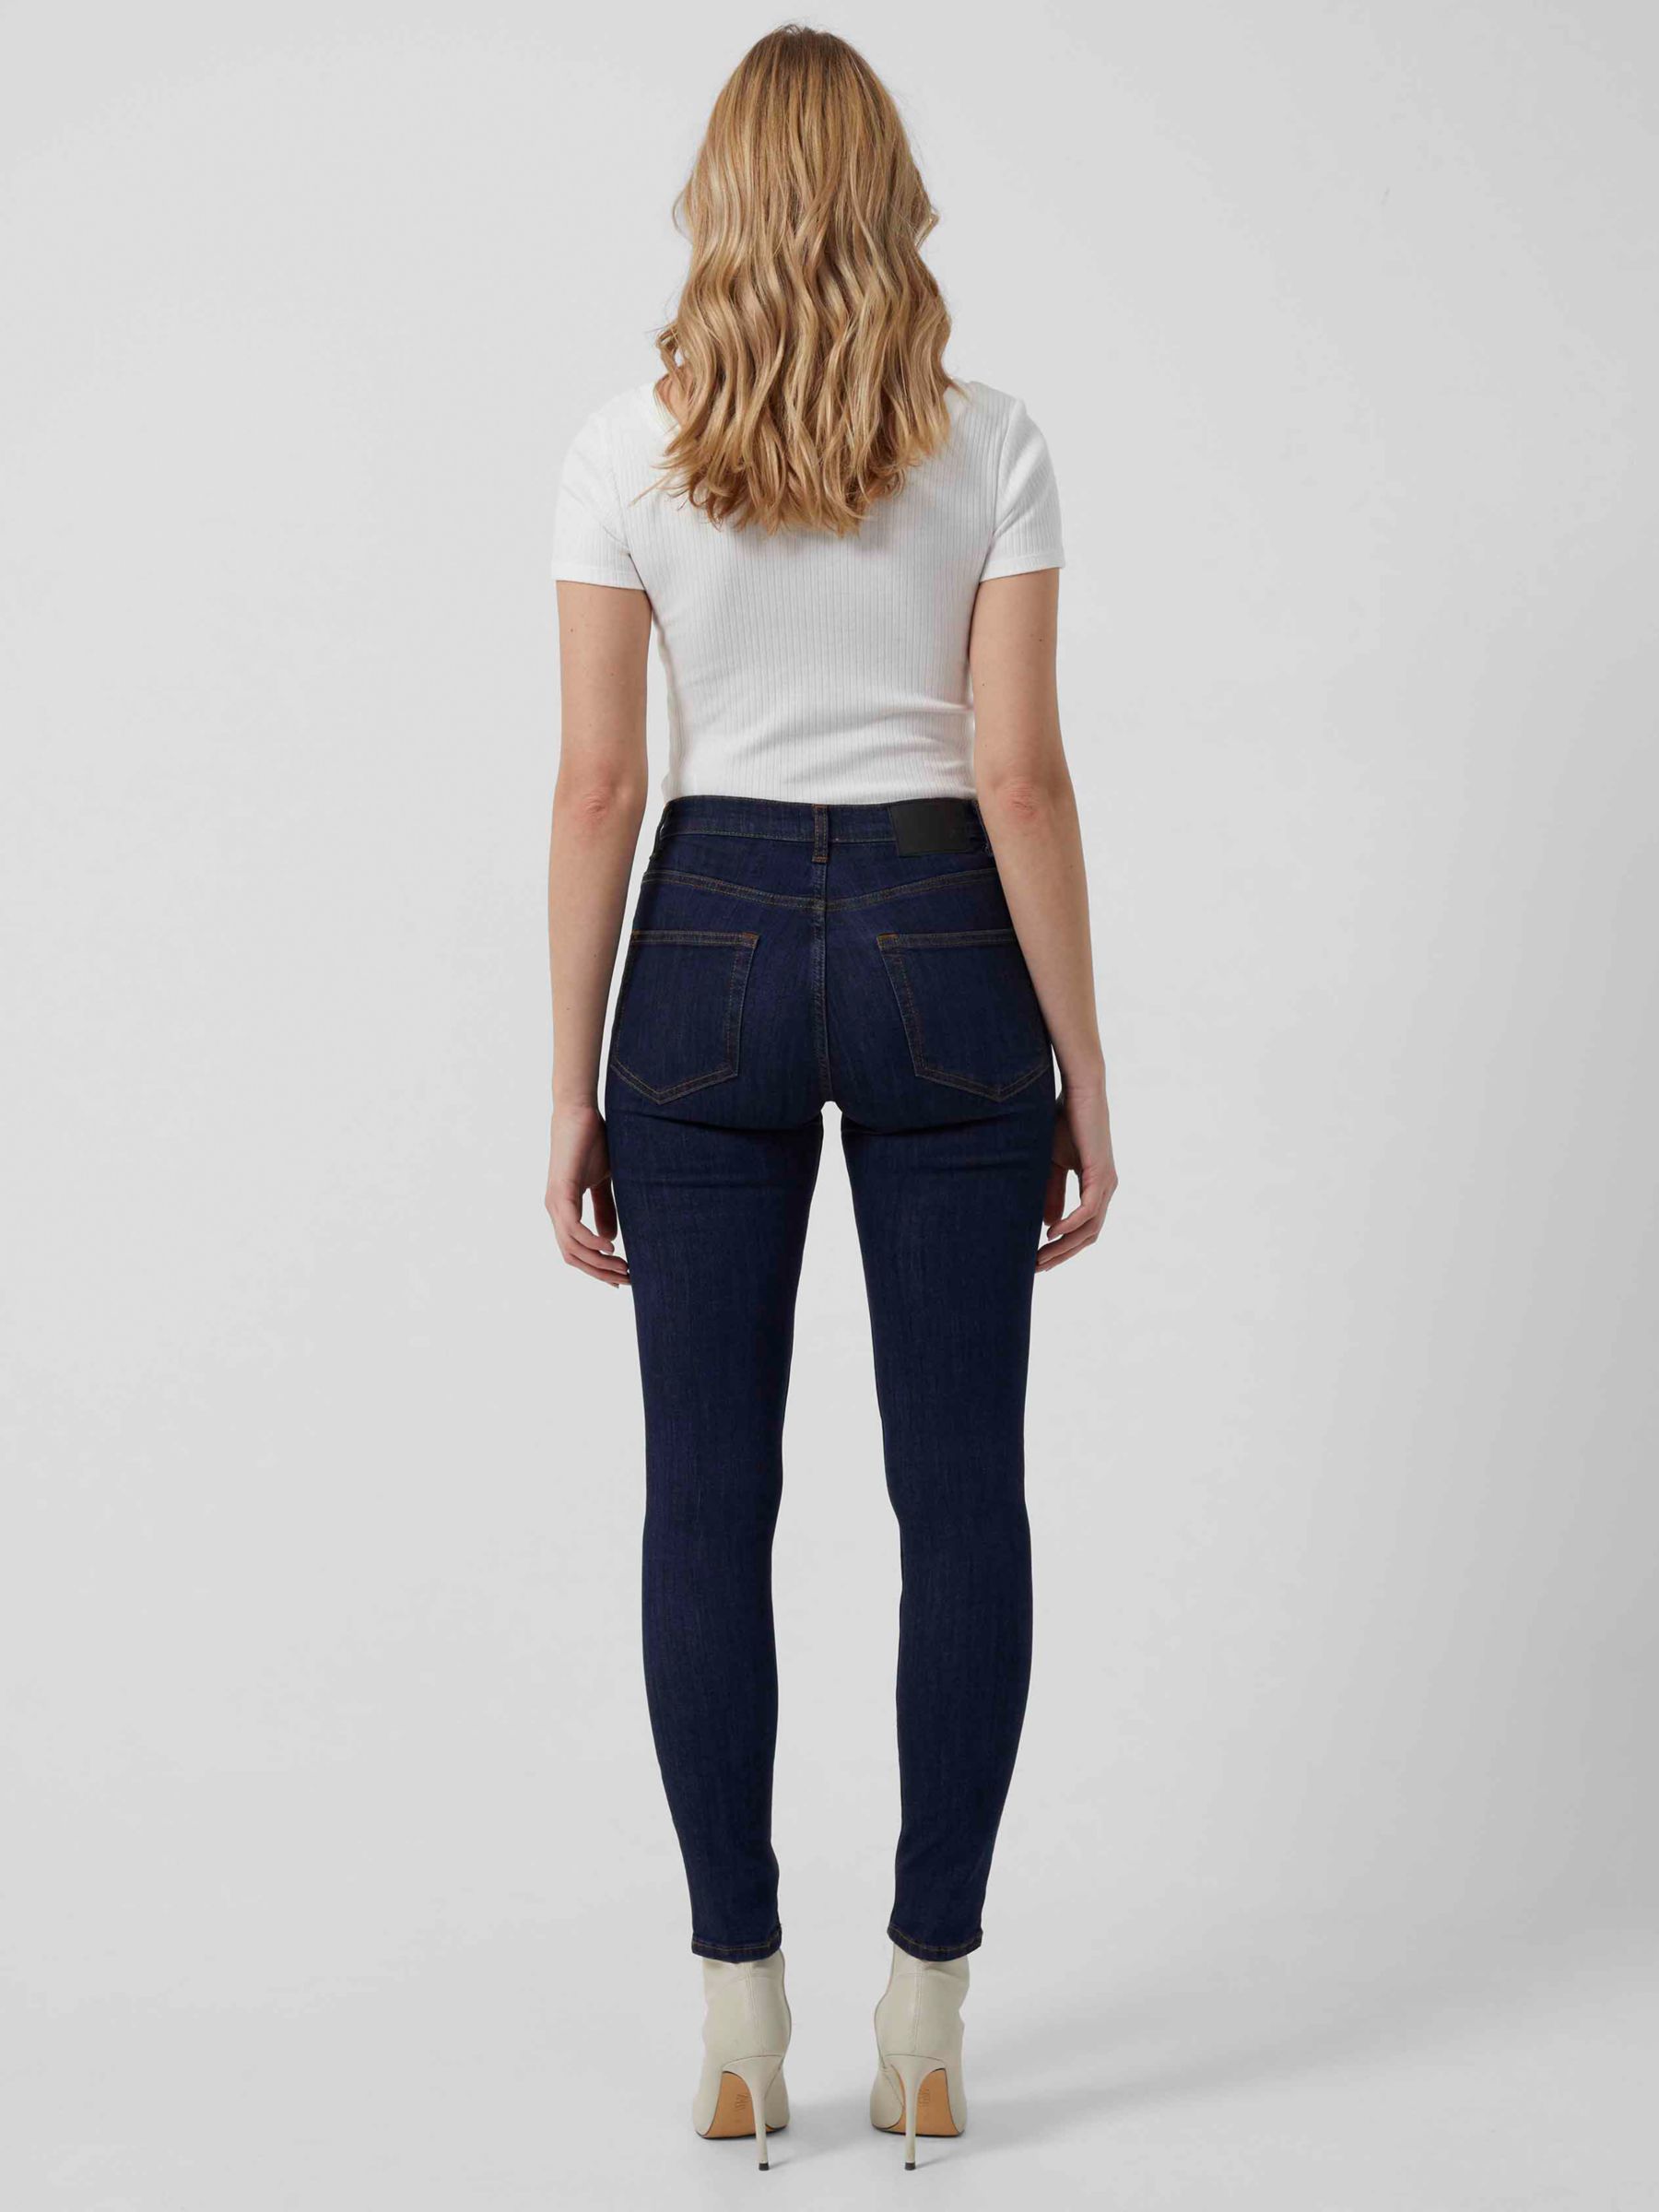 French Connection Skinny Jeans, Blue/Black, 6